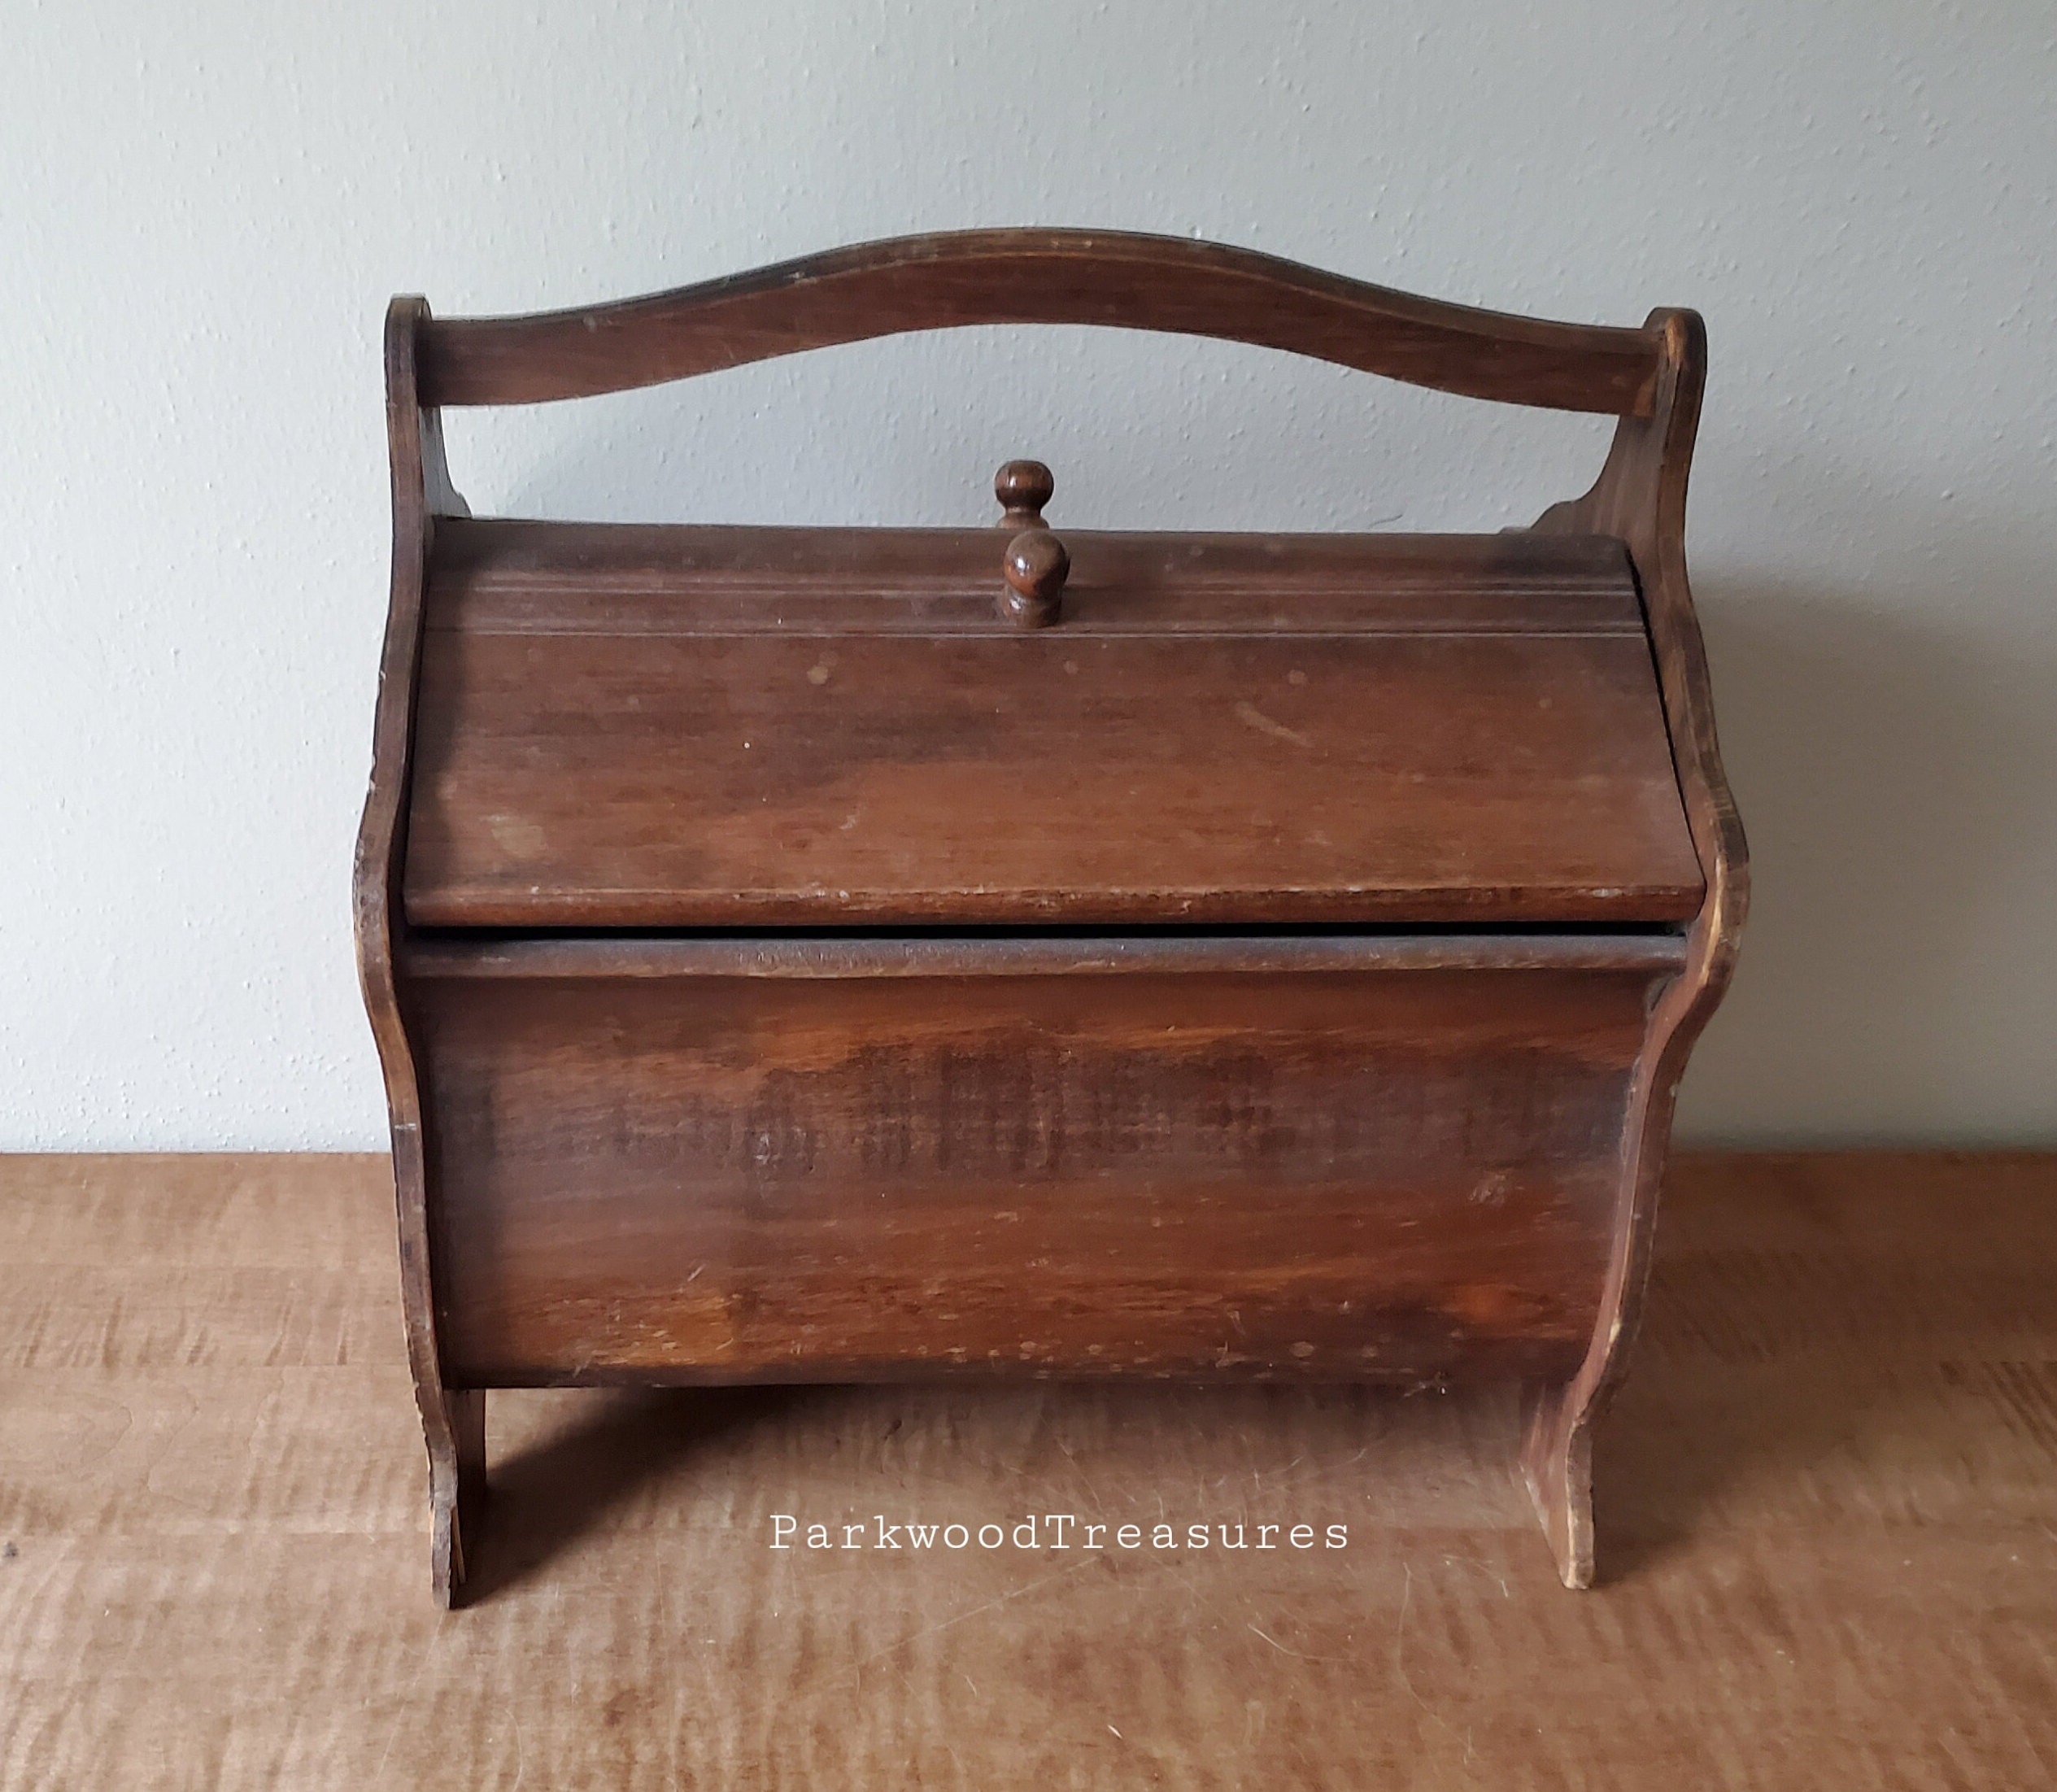 UNIQUE 1960s wooden SEWING BOX, lid with handmade inlays – VINTARAMA